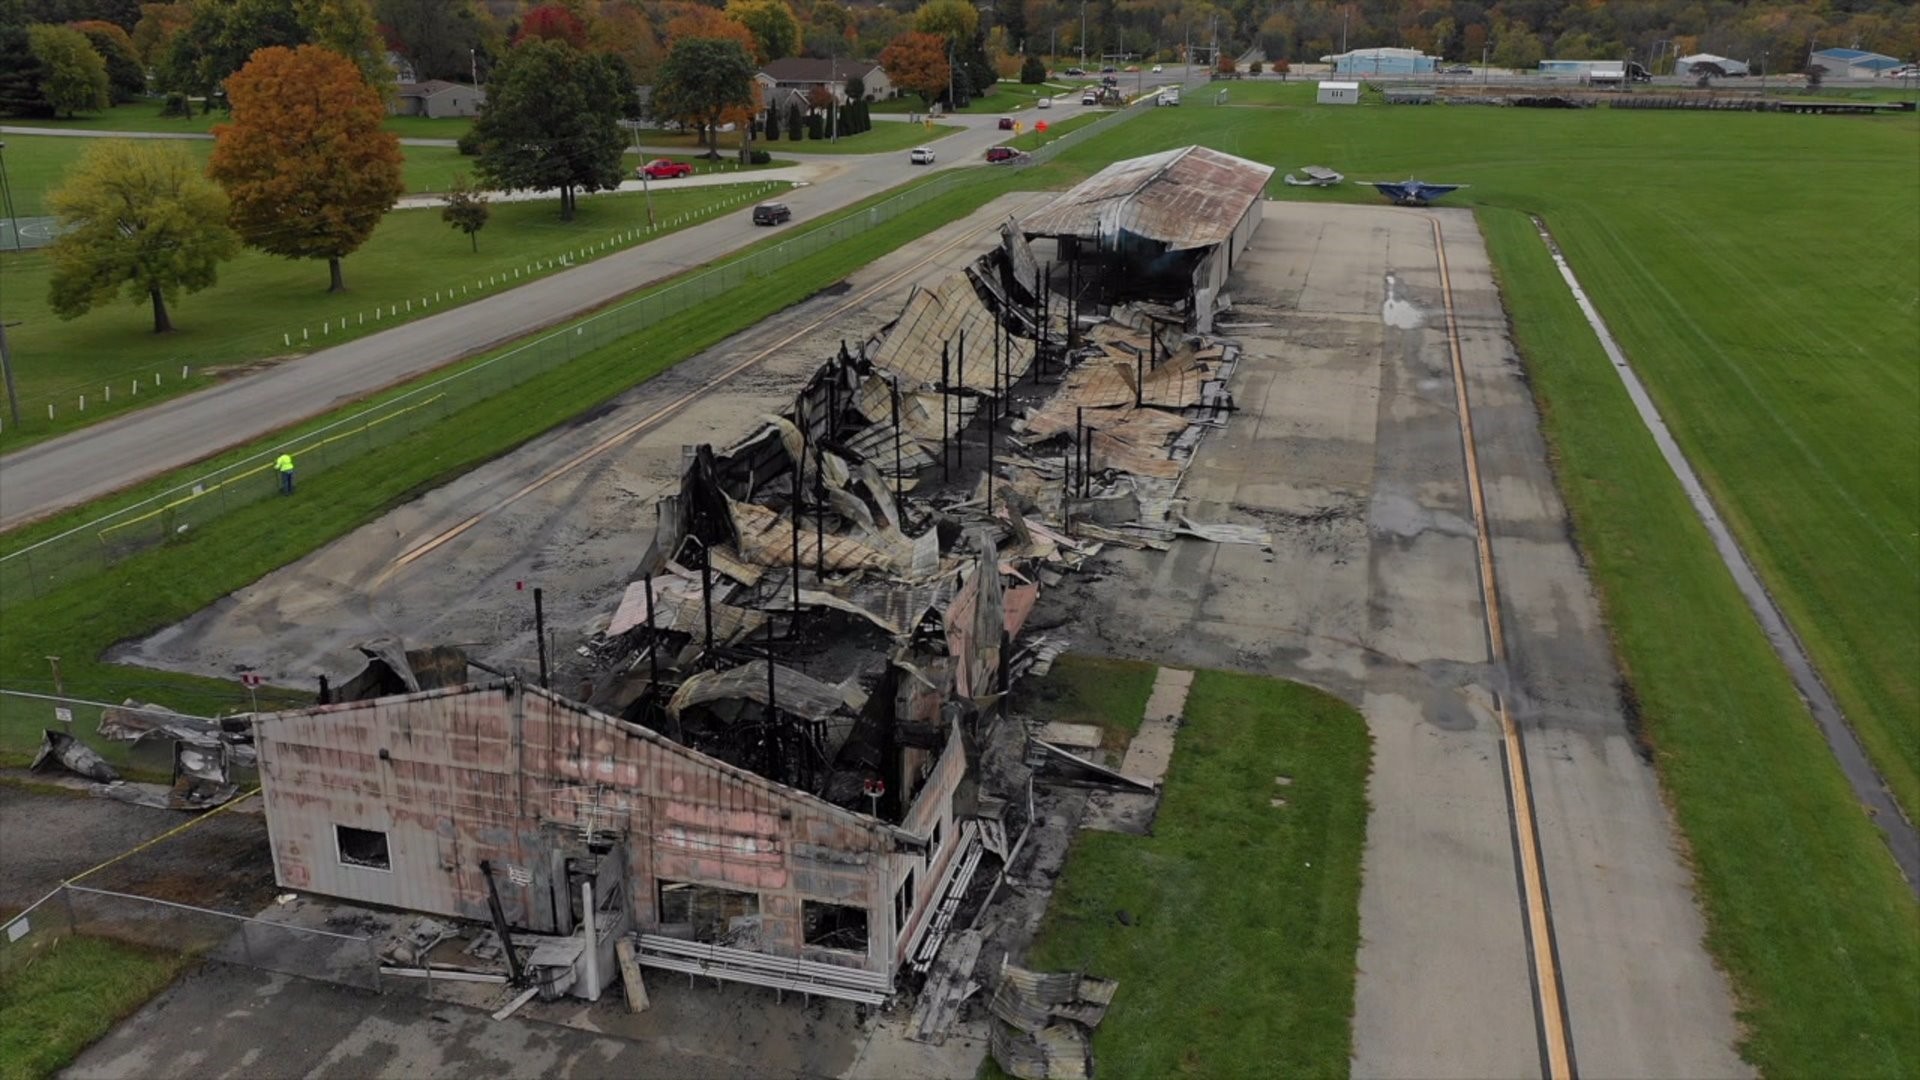 Monmouth pilots mourning loss of history after hangar destroyed by fire